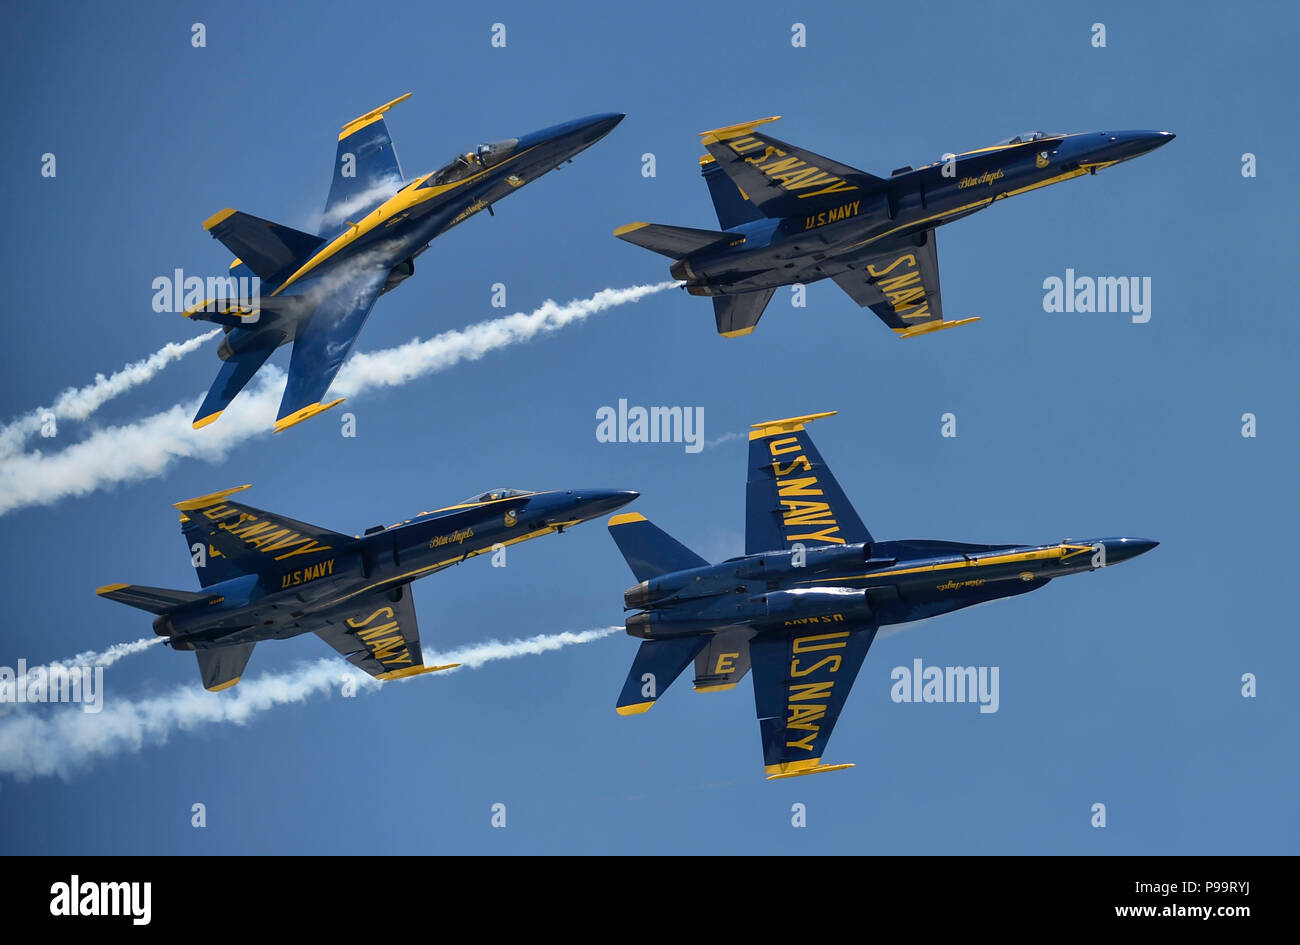 180713-N-ZC358-1364  PENSACOLA BEACH, Fla. (July 13, 2018)   The U.S. Navy Flight Demonstration Squadron, the Blue Angels, Diamond pilots perform the Low Break Cross at the 2018 Pensacola Beach Air Show. The Blue Angels are scheduled to perform more than 60 demonstrations at more than 30 locations across the U.S. and Canada in 2018. (U.S. Navy photo by Mass Communication Specialist 2nd Class Jess Gray/Released) Stock Photo